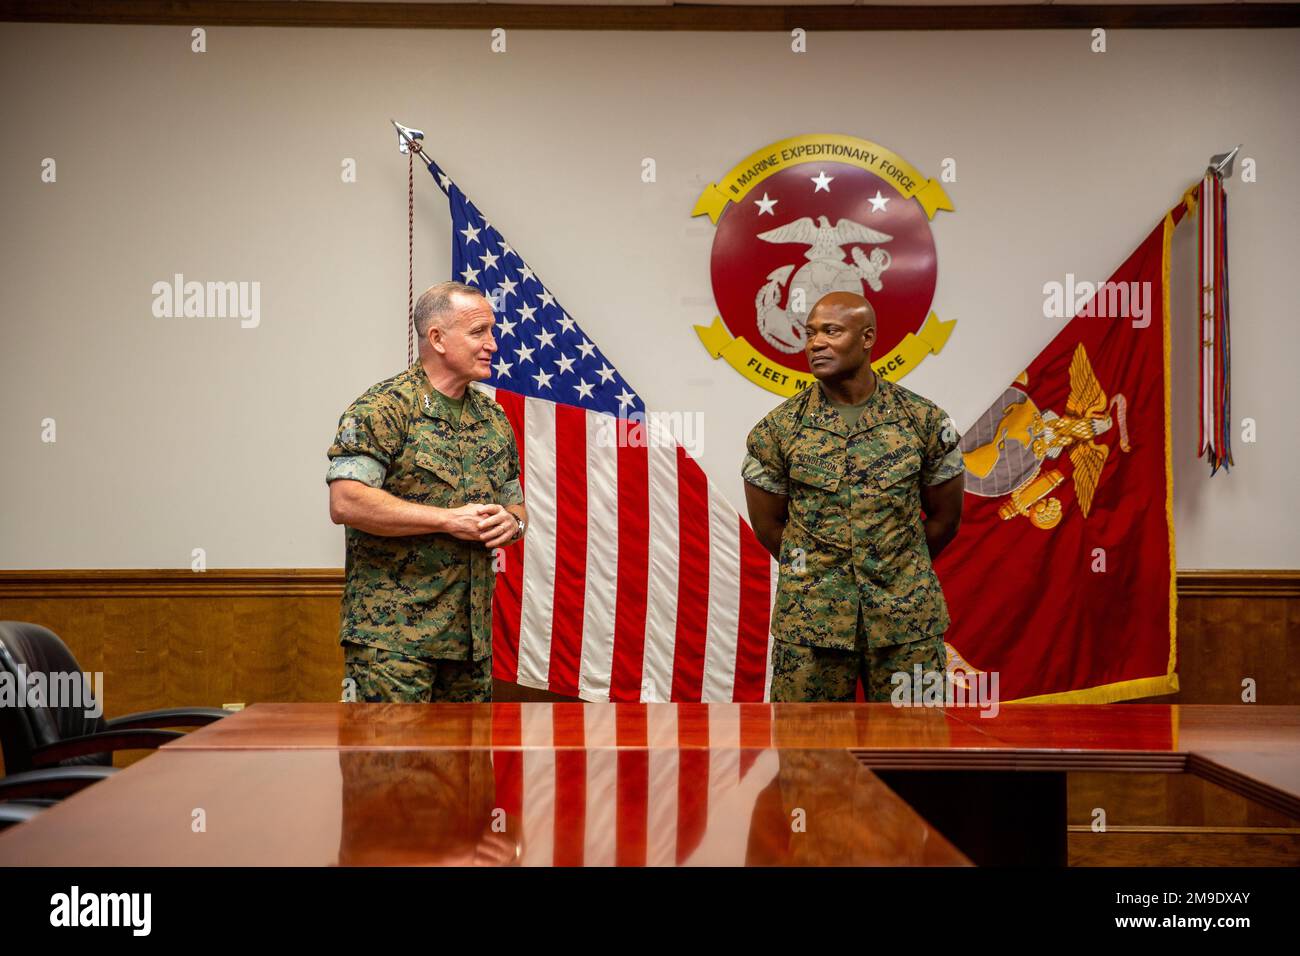 U.S. Marine Corps Lt. Gen. William Jurney presents a commemorative plaque to Brig. Gen. Anthony Henderson on Camp Lejeune, North Carolina, May 18, 2022. Jurney is the II Marine Expeditionary Force Commanding General and Henderson is the II MEF Deputy Commanding General. Stock Photo